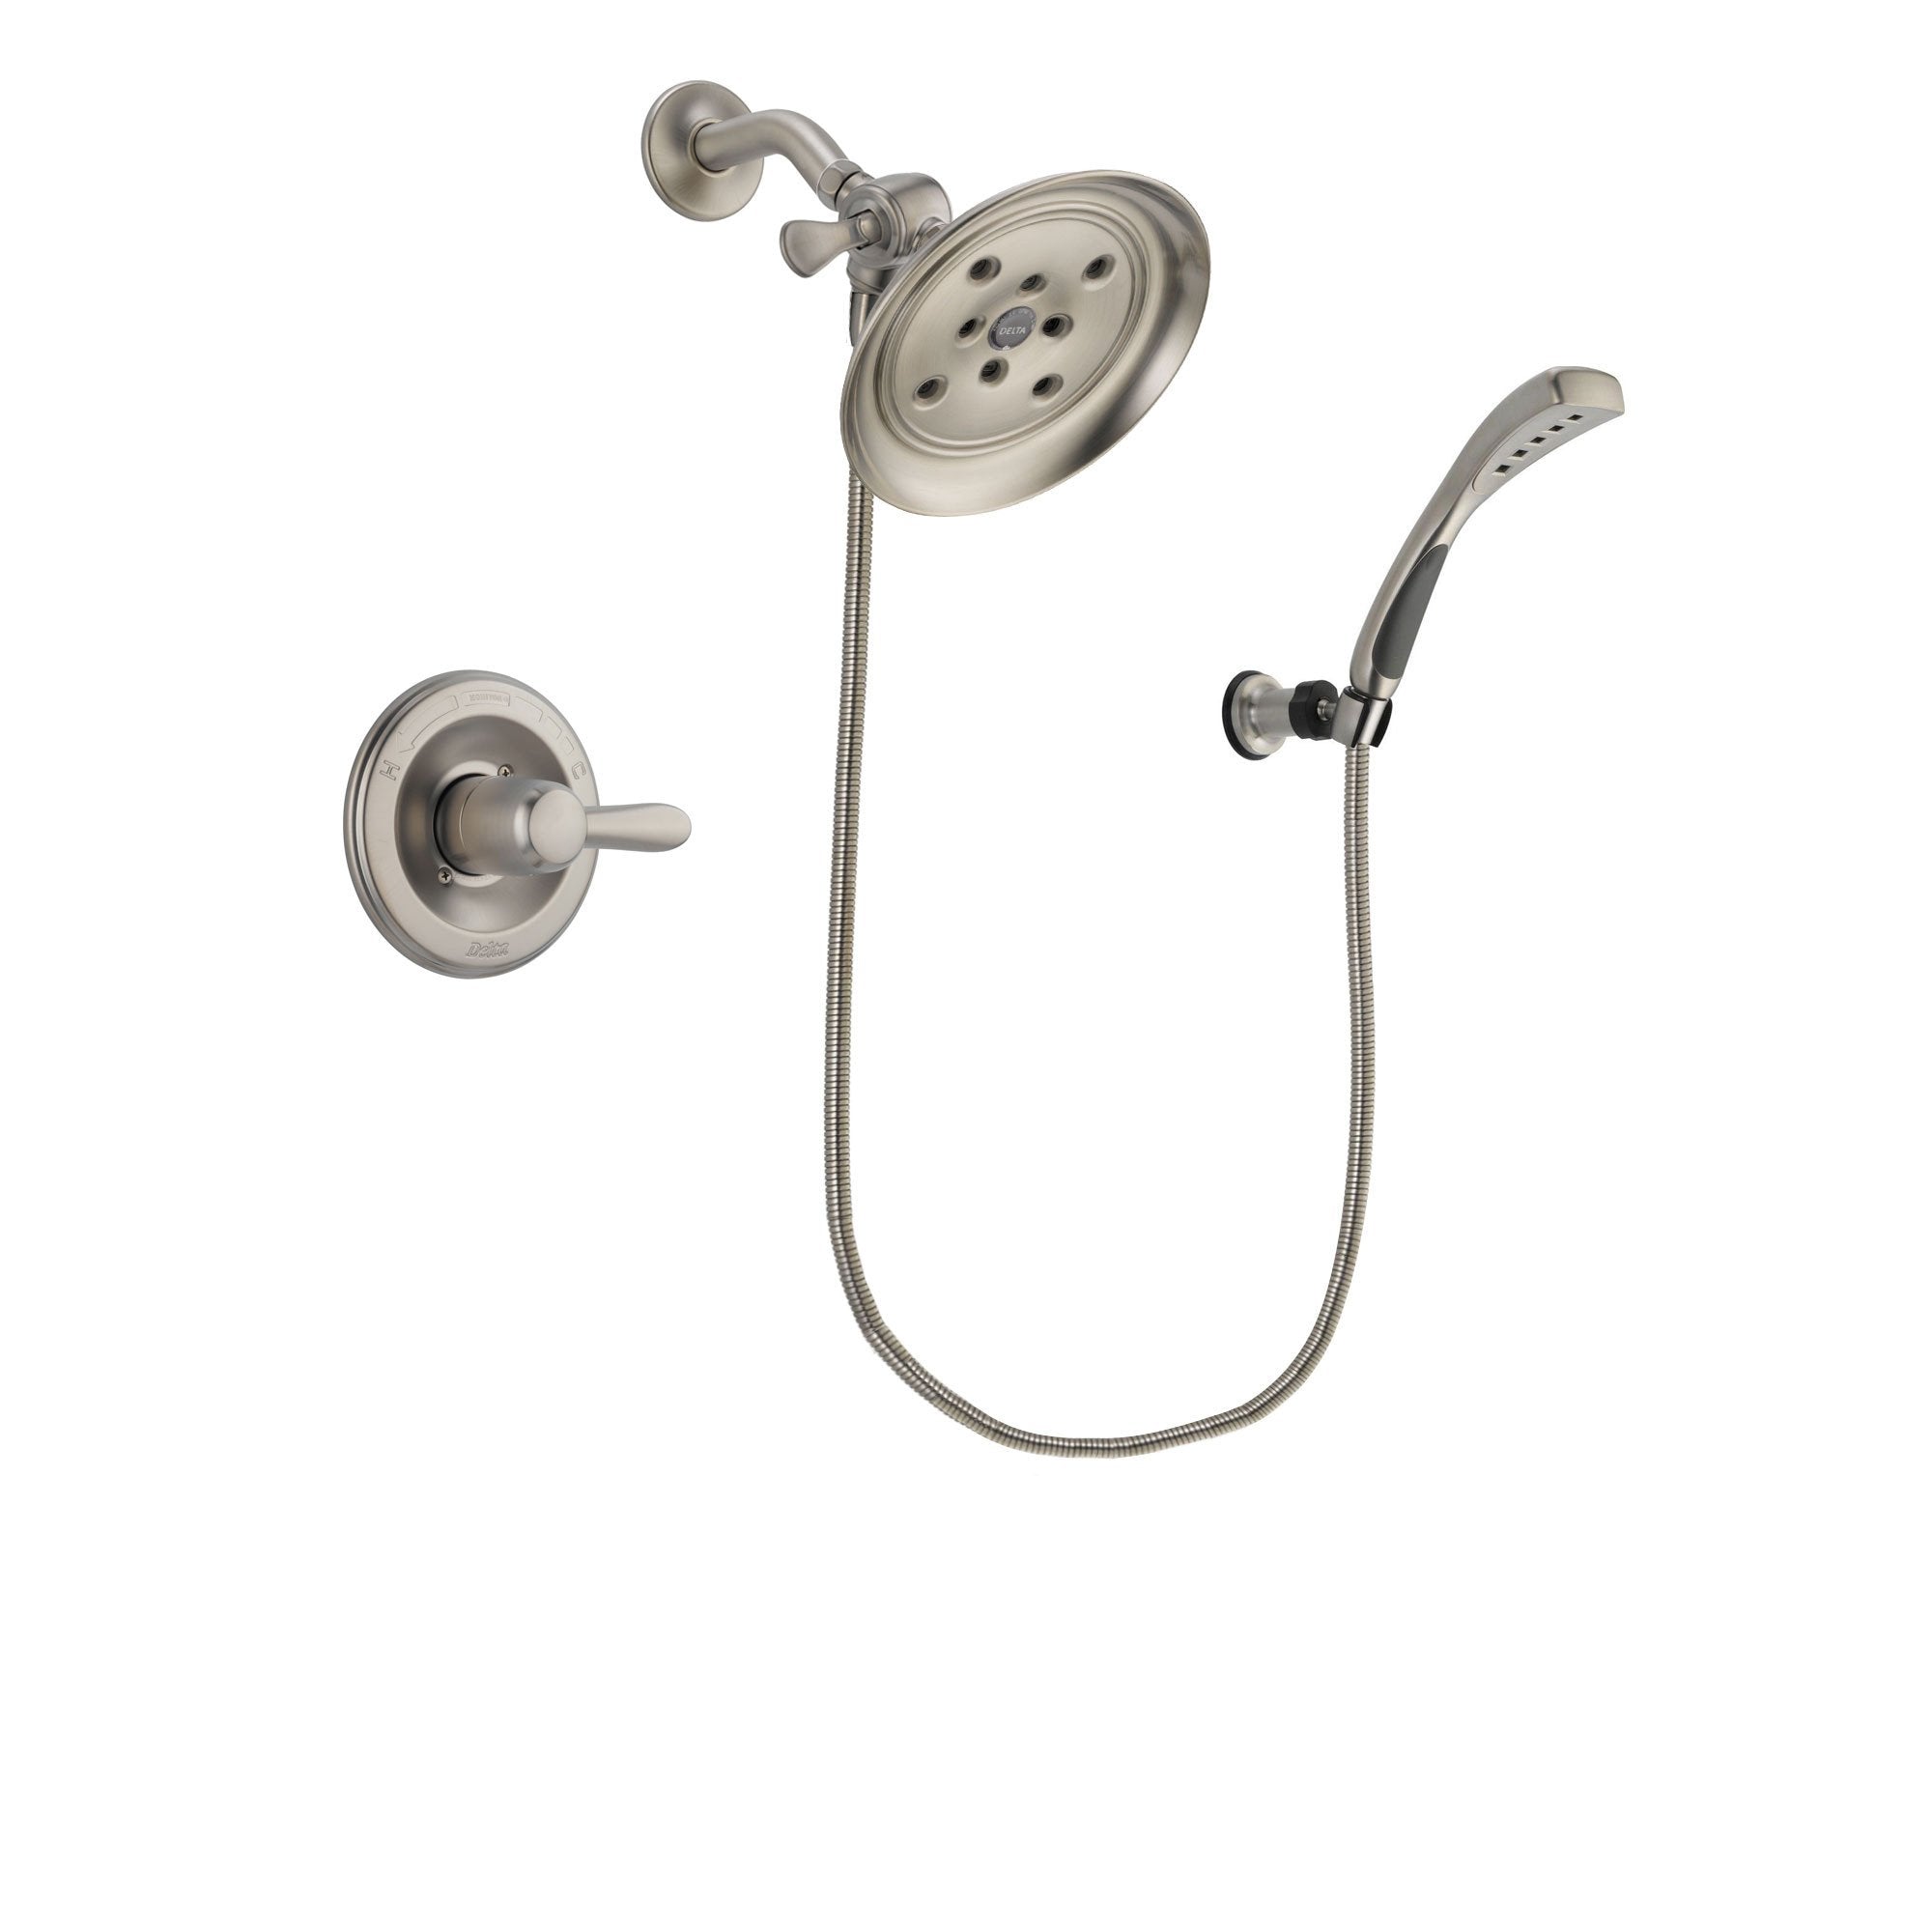 Delta Lahara Stainless Steel Finish Shower Faucet System Package with Large Rain Showerhead and Wall Mounted Handshower Includes Rough-in Valve DSP1864V